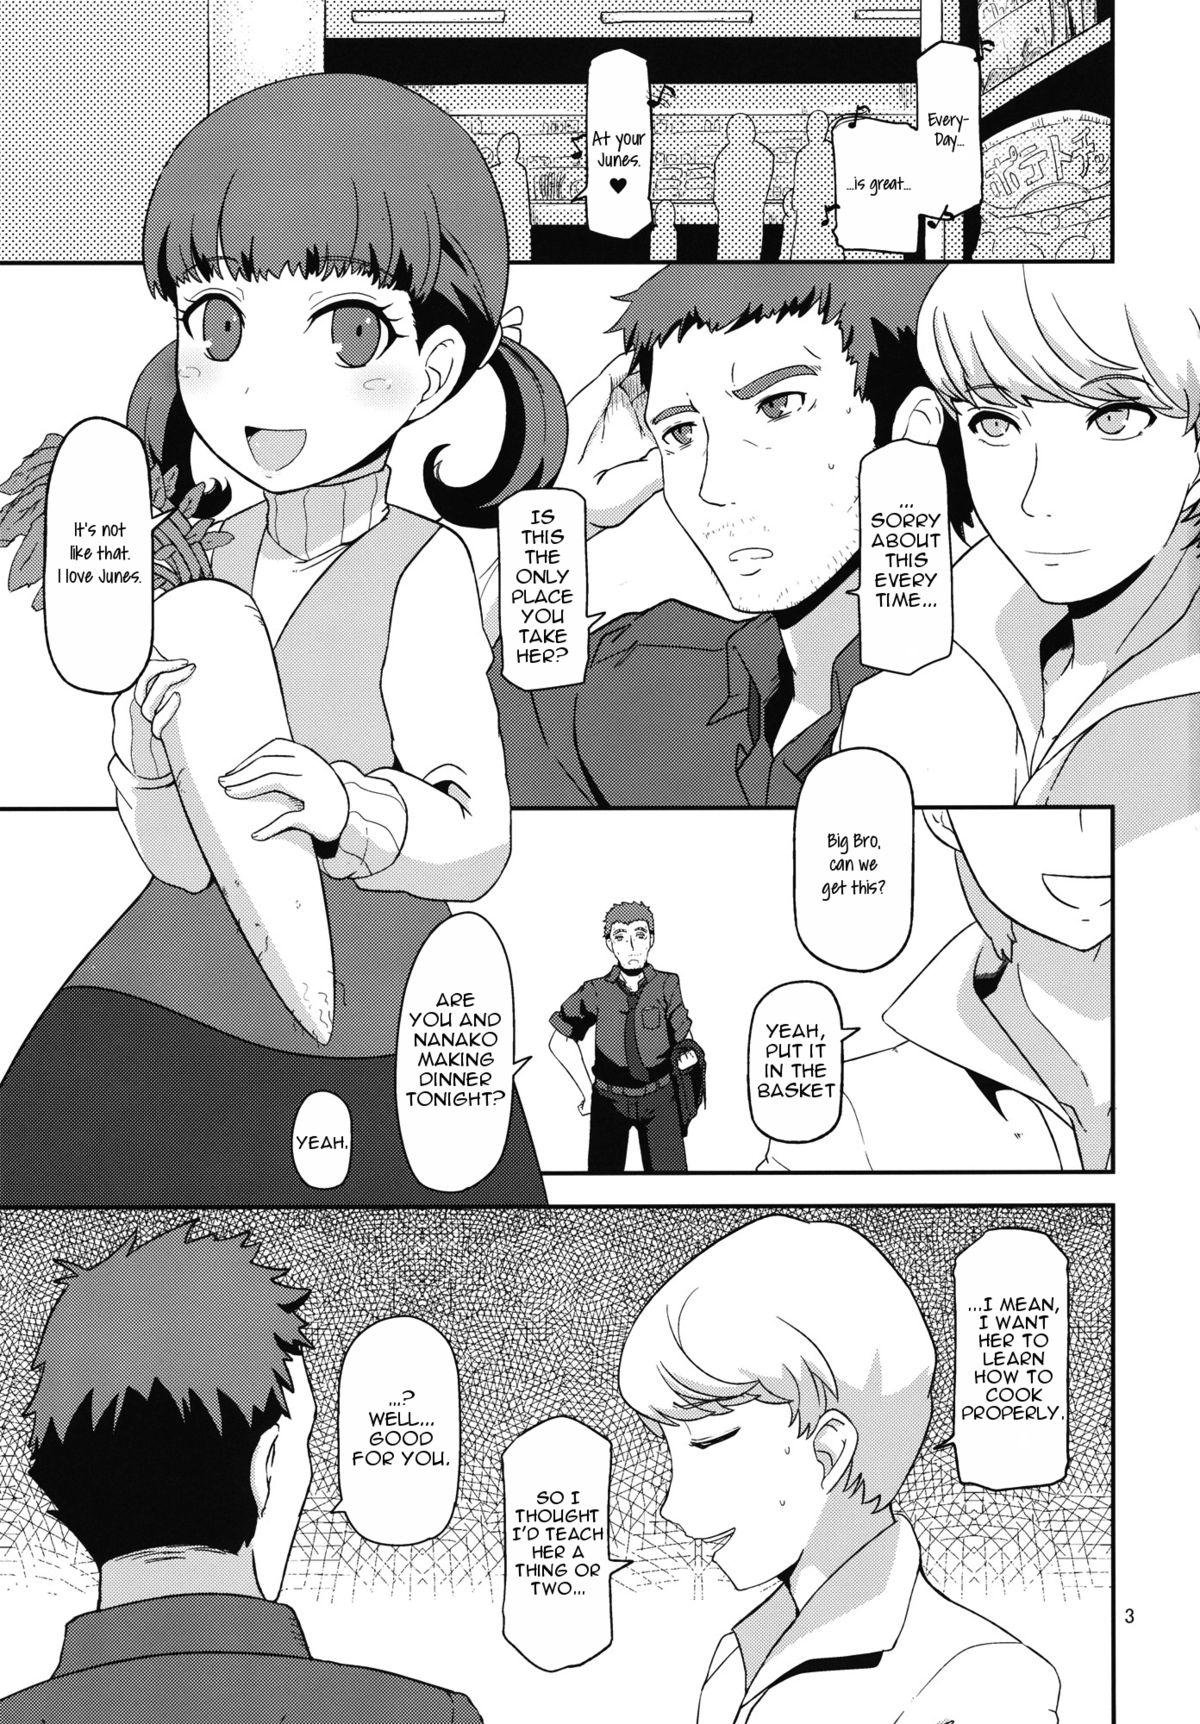 Lingerie Oyomesan no Narikata | How to Become a Wife - Persona 4 Head - Page 2